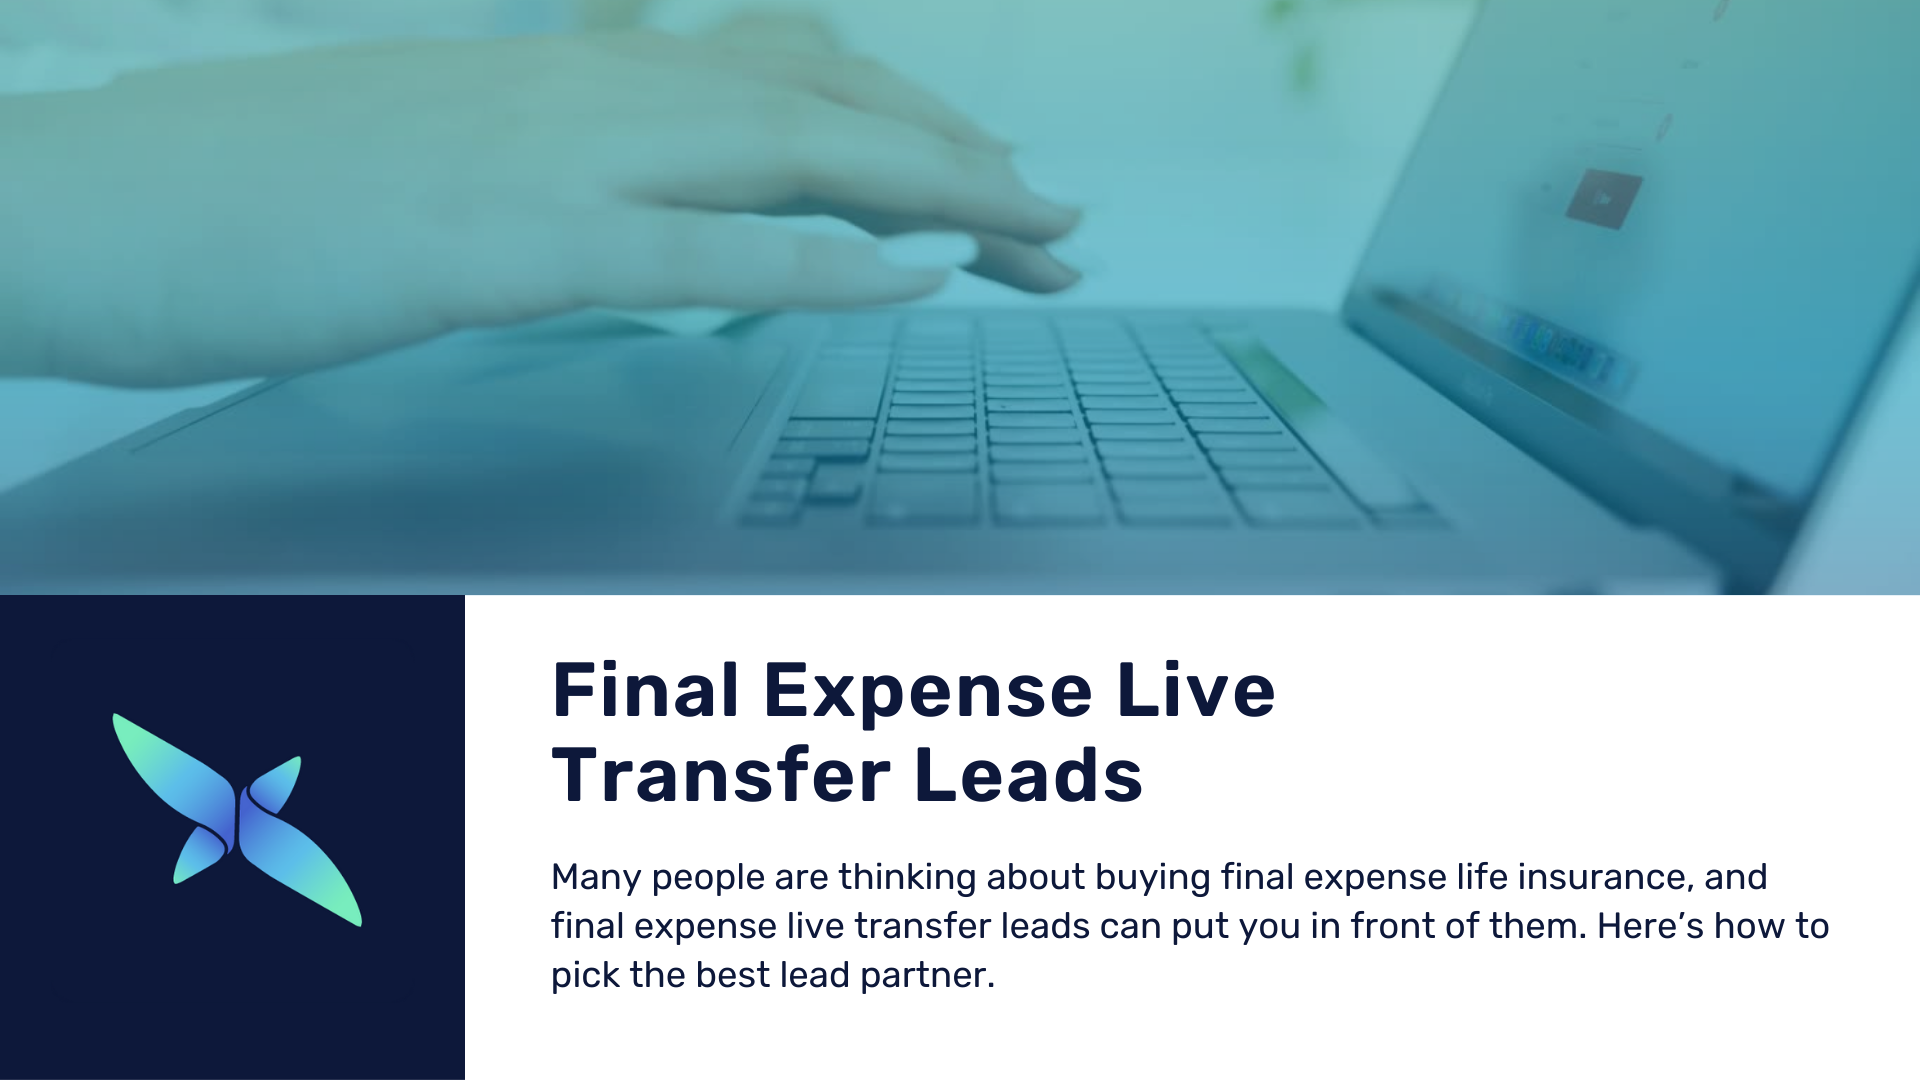 Final Expense Live Transfer Leads